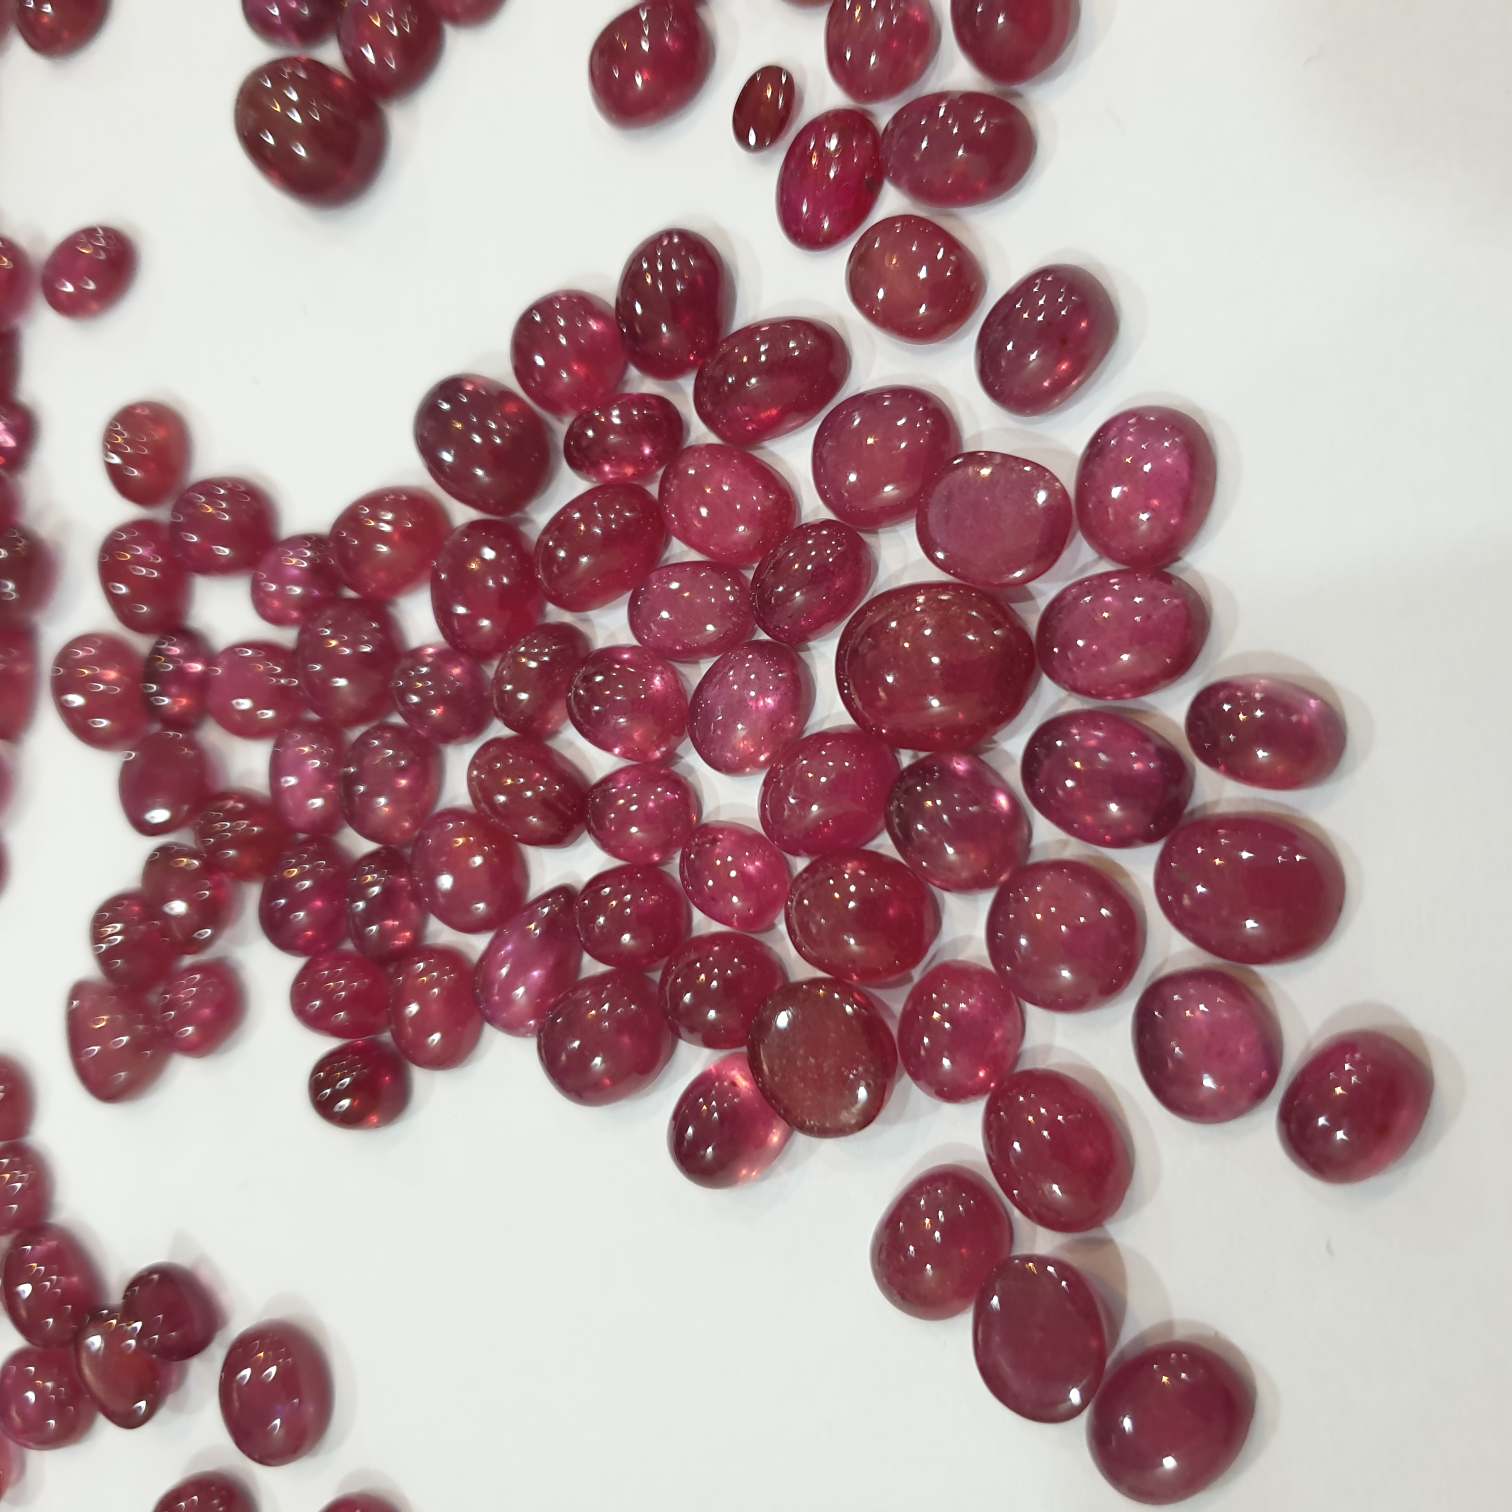 10 Pcs Natural Ruby Cabochons Big Sizes 8-11mm Ovals African Mined - The LabradoriteKing